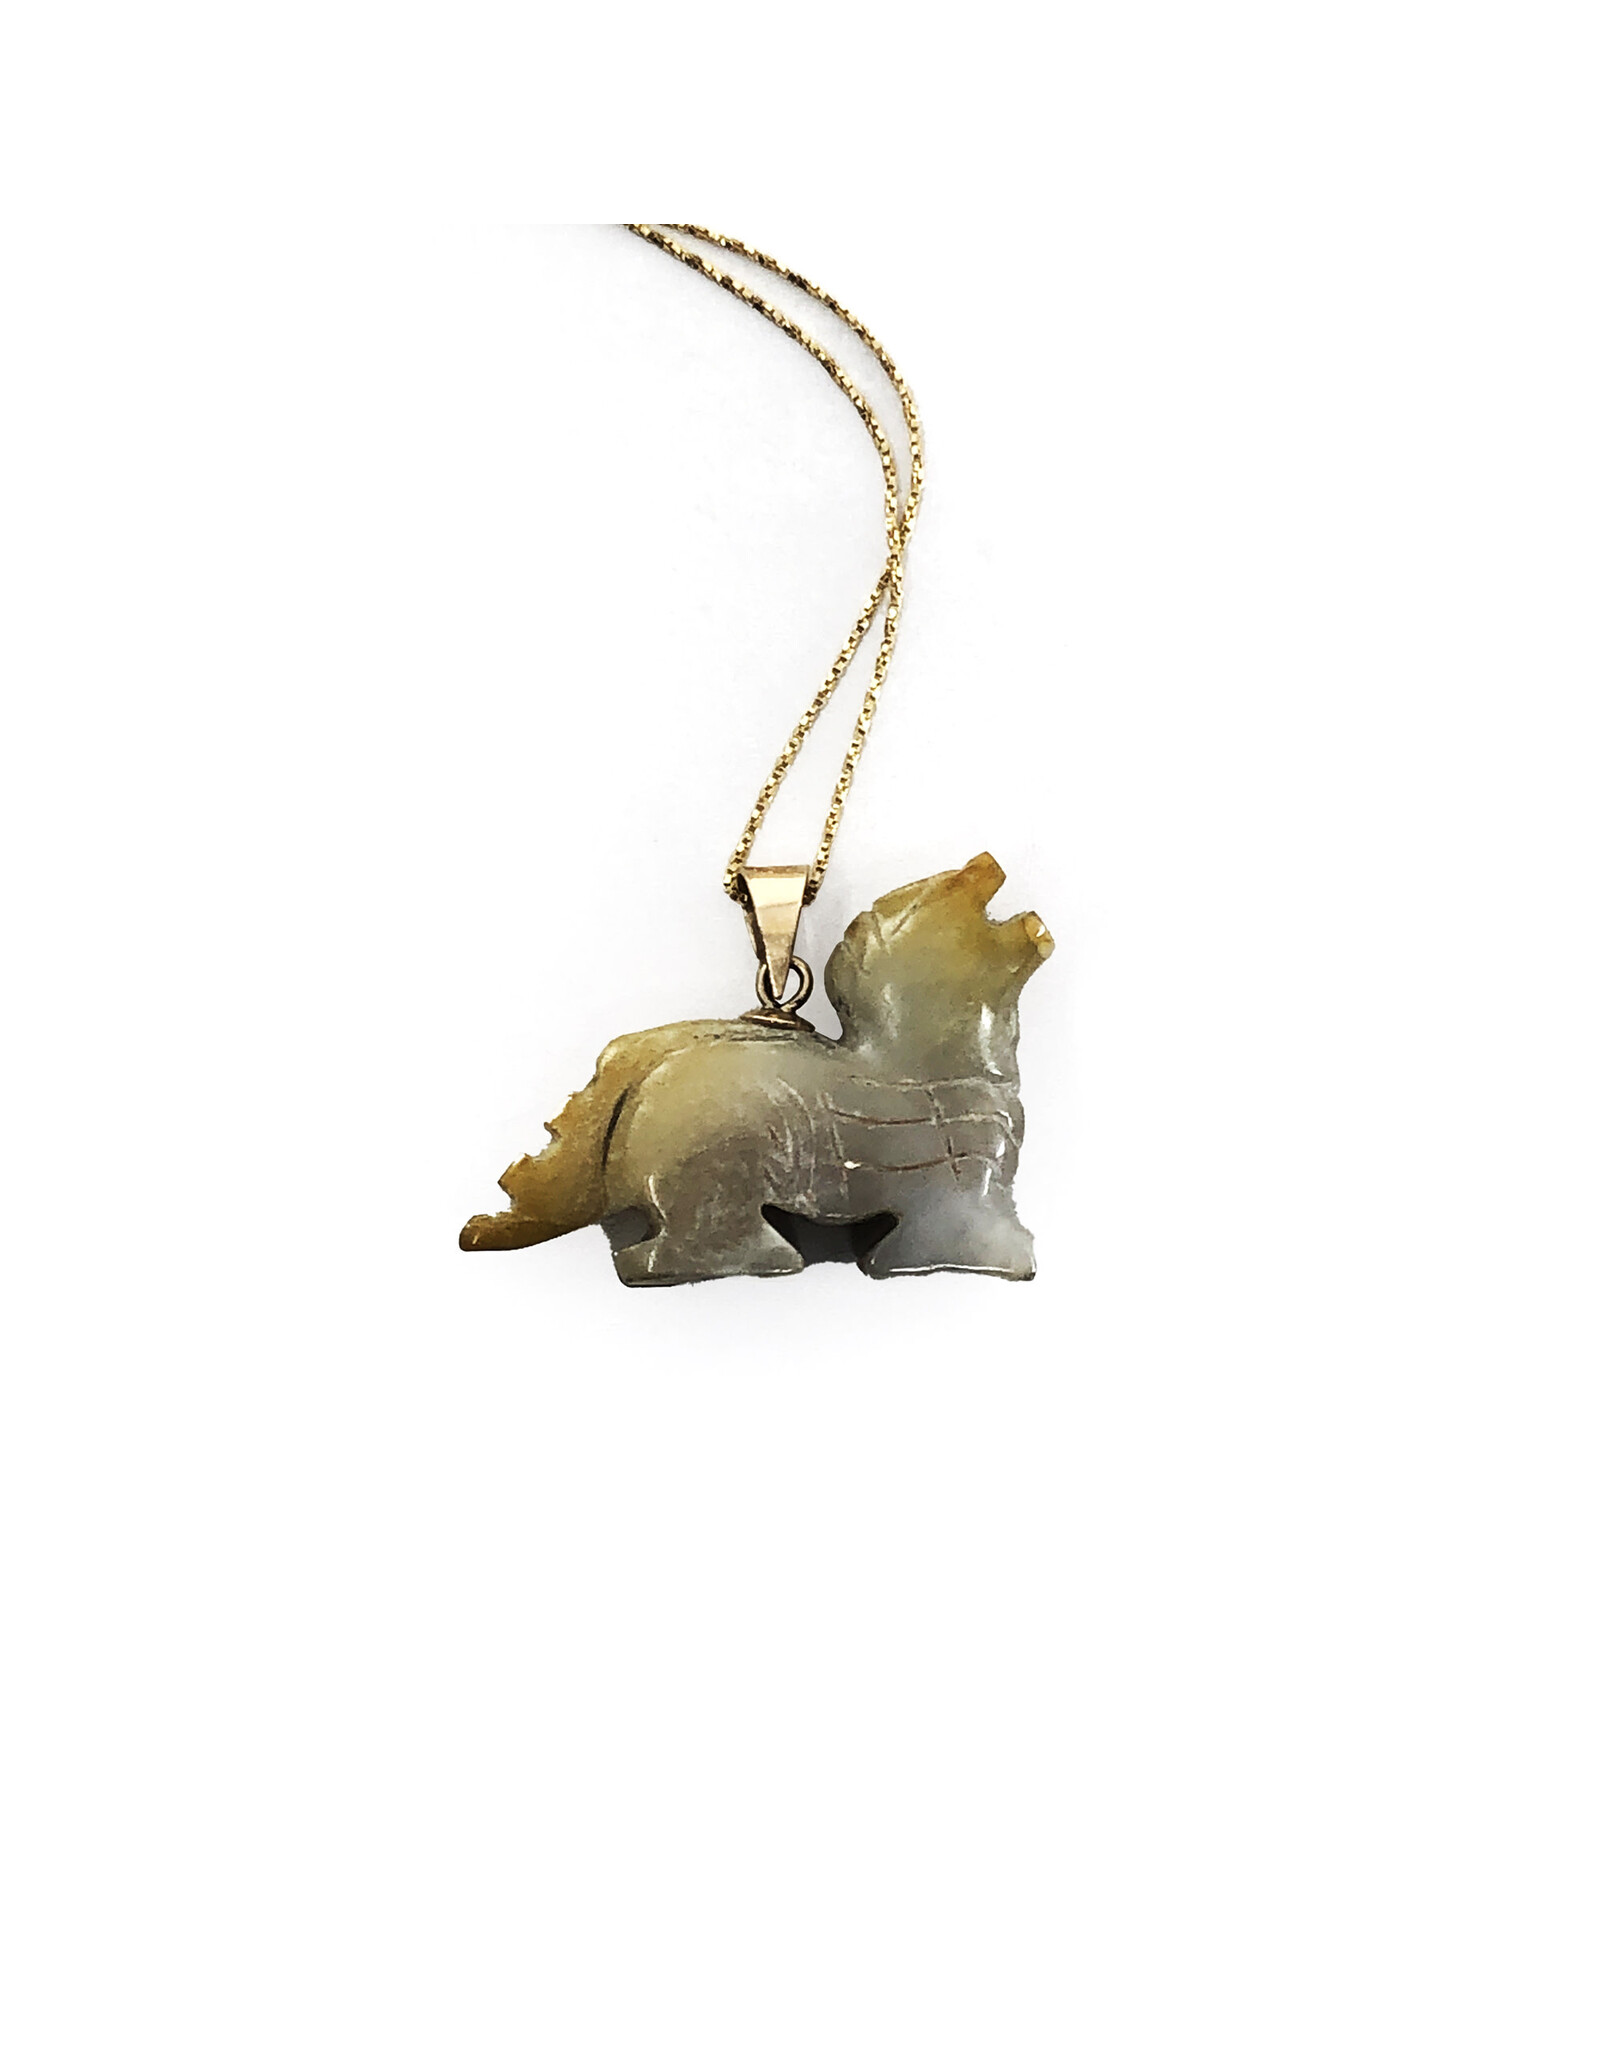 Carved Jade Dragon Pendant on 14K Gold Chain